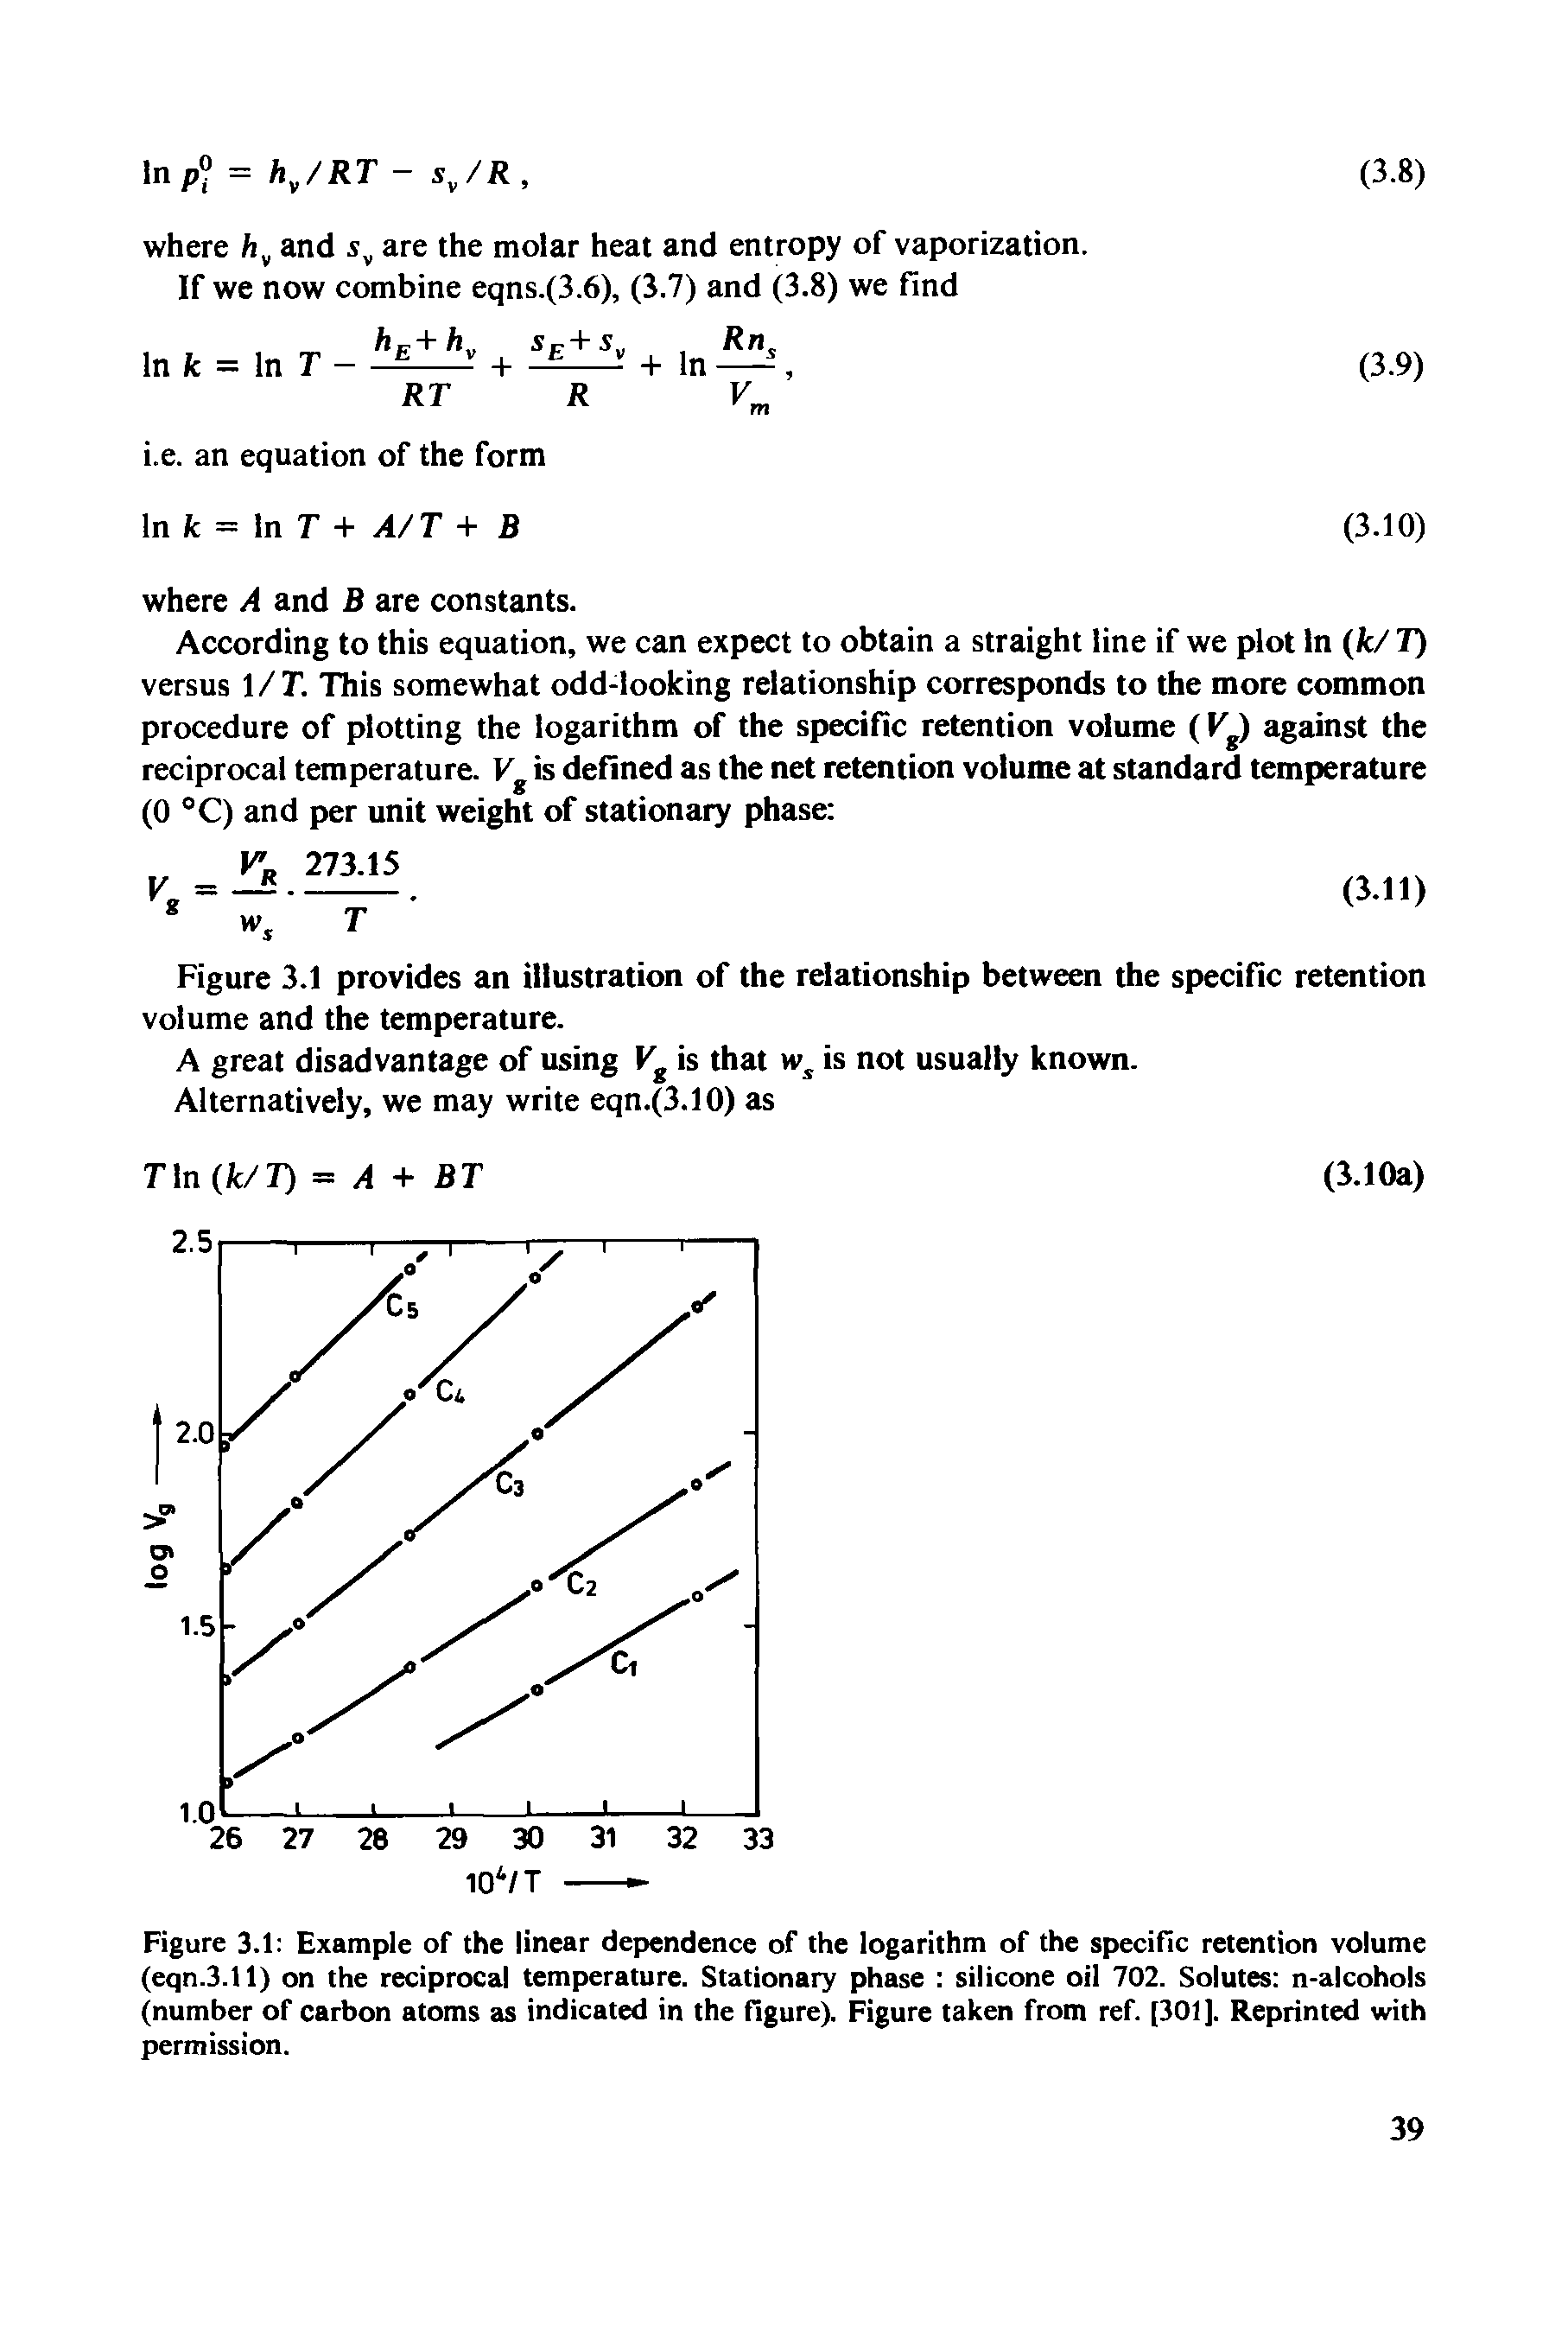 Figure 3.1 Example of the linear dependence of the logarithm of the specific retention volume (eqn.3.U) on the reciprocal temperature. Stationary phase silicone oil 702. Solutes n-alcohols (number of carbon atoms as indicated in the figure). Figure taken from ref. [301], Reprinted with permission.